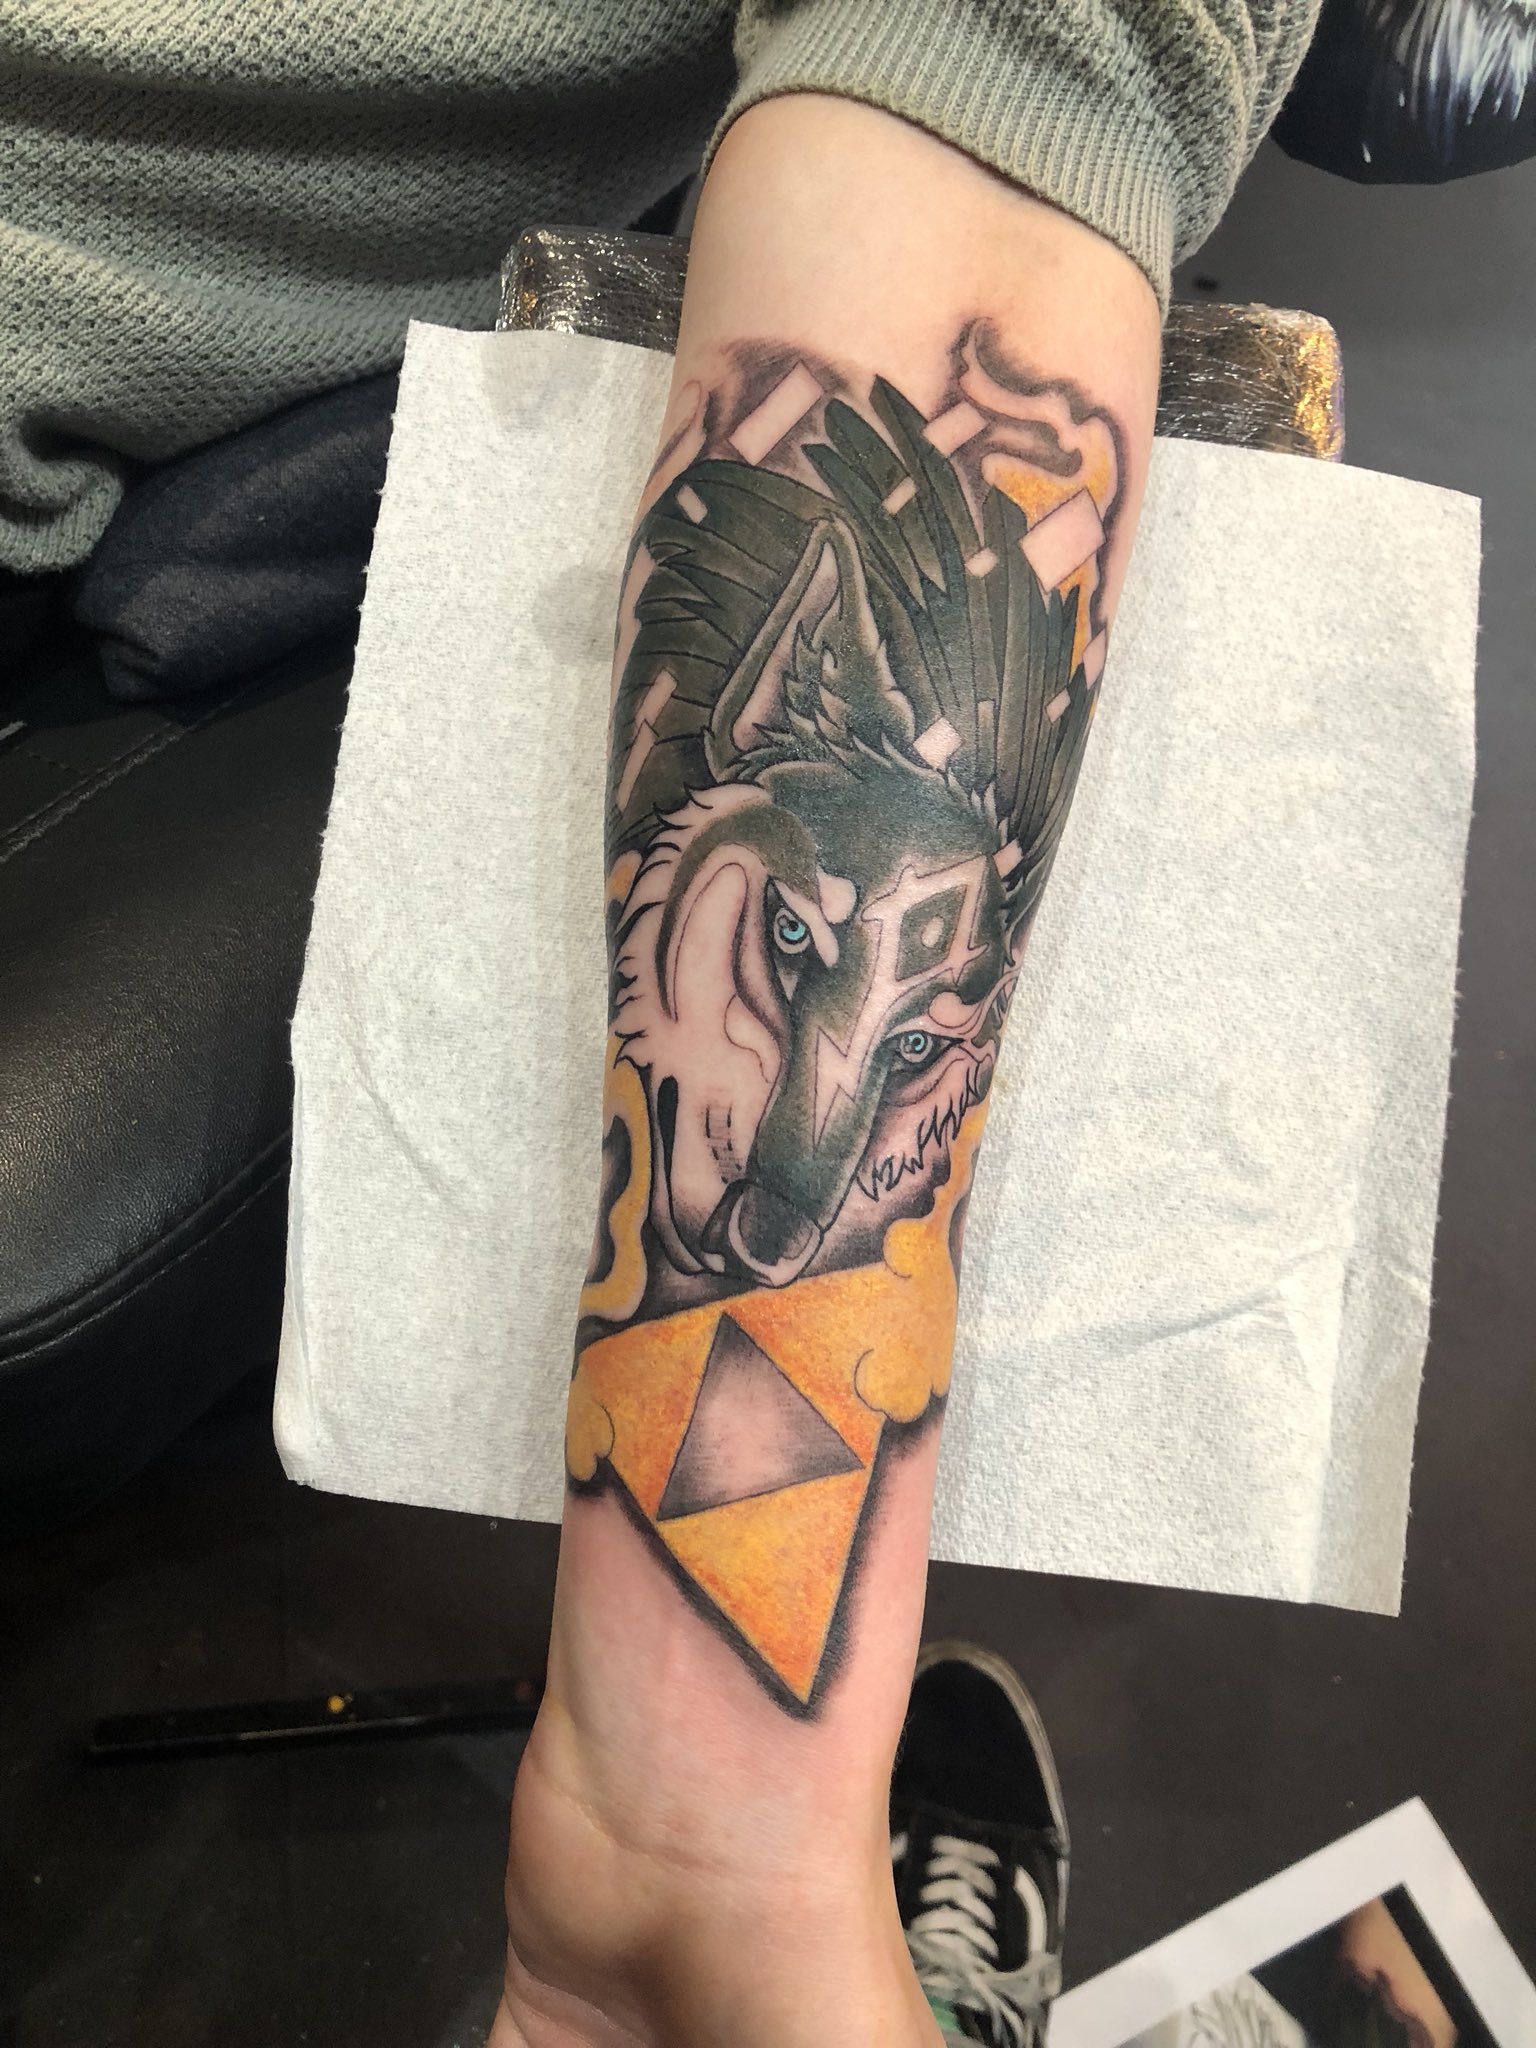 Show off your video game tattoos  ResetEra